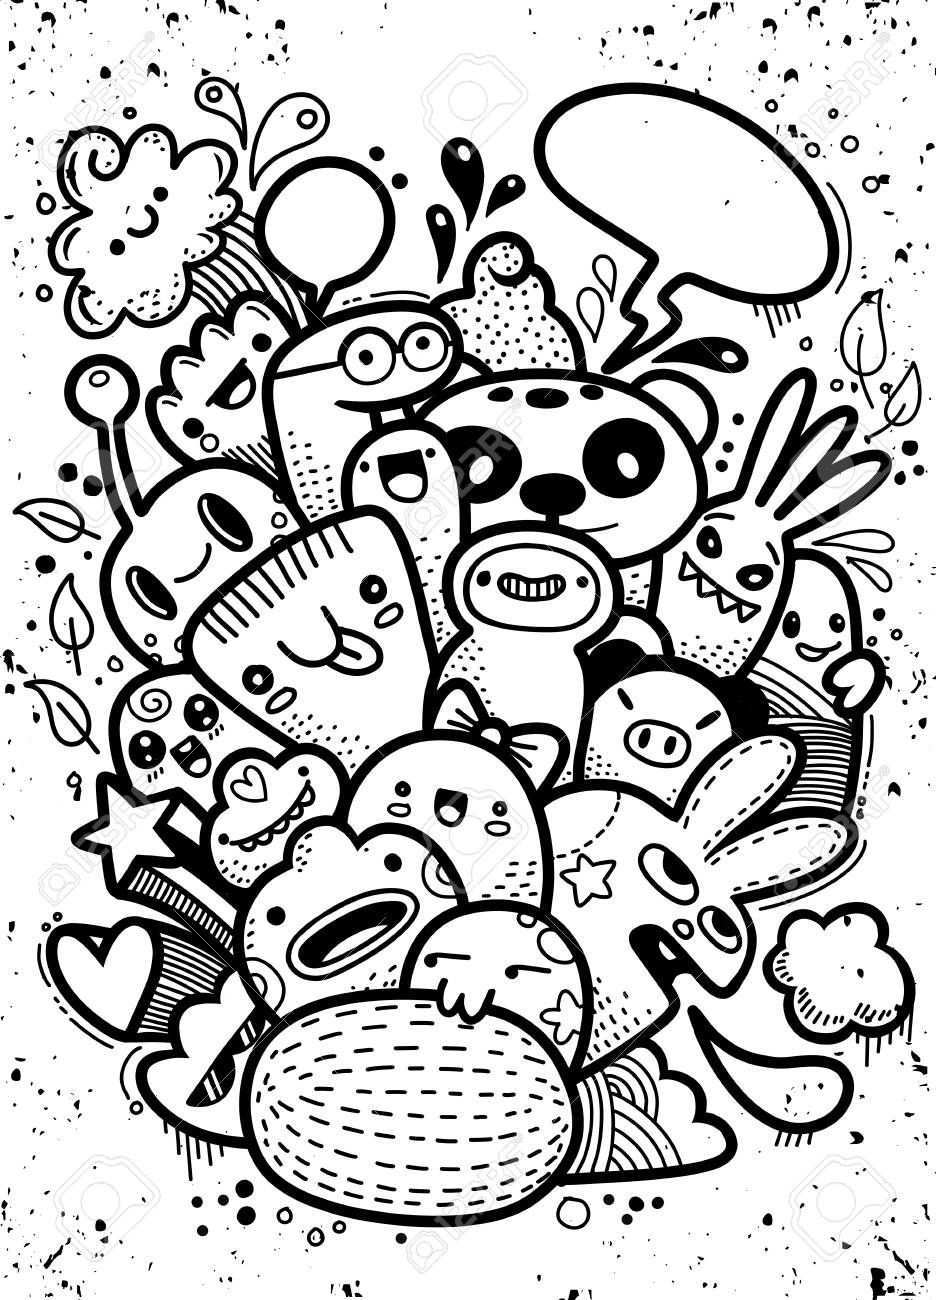 Hipster Hand Drawn Crazy Doodle Monster Group Drawing Style Vector Illustration Illus